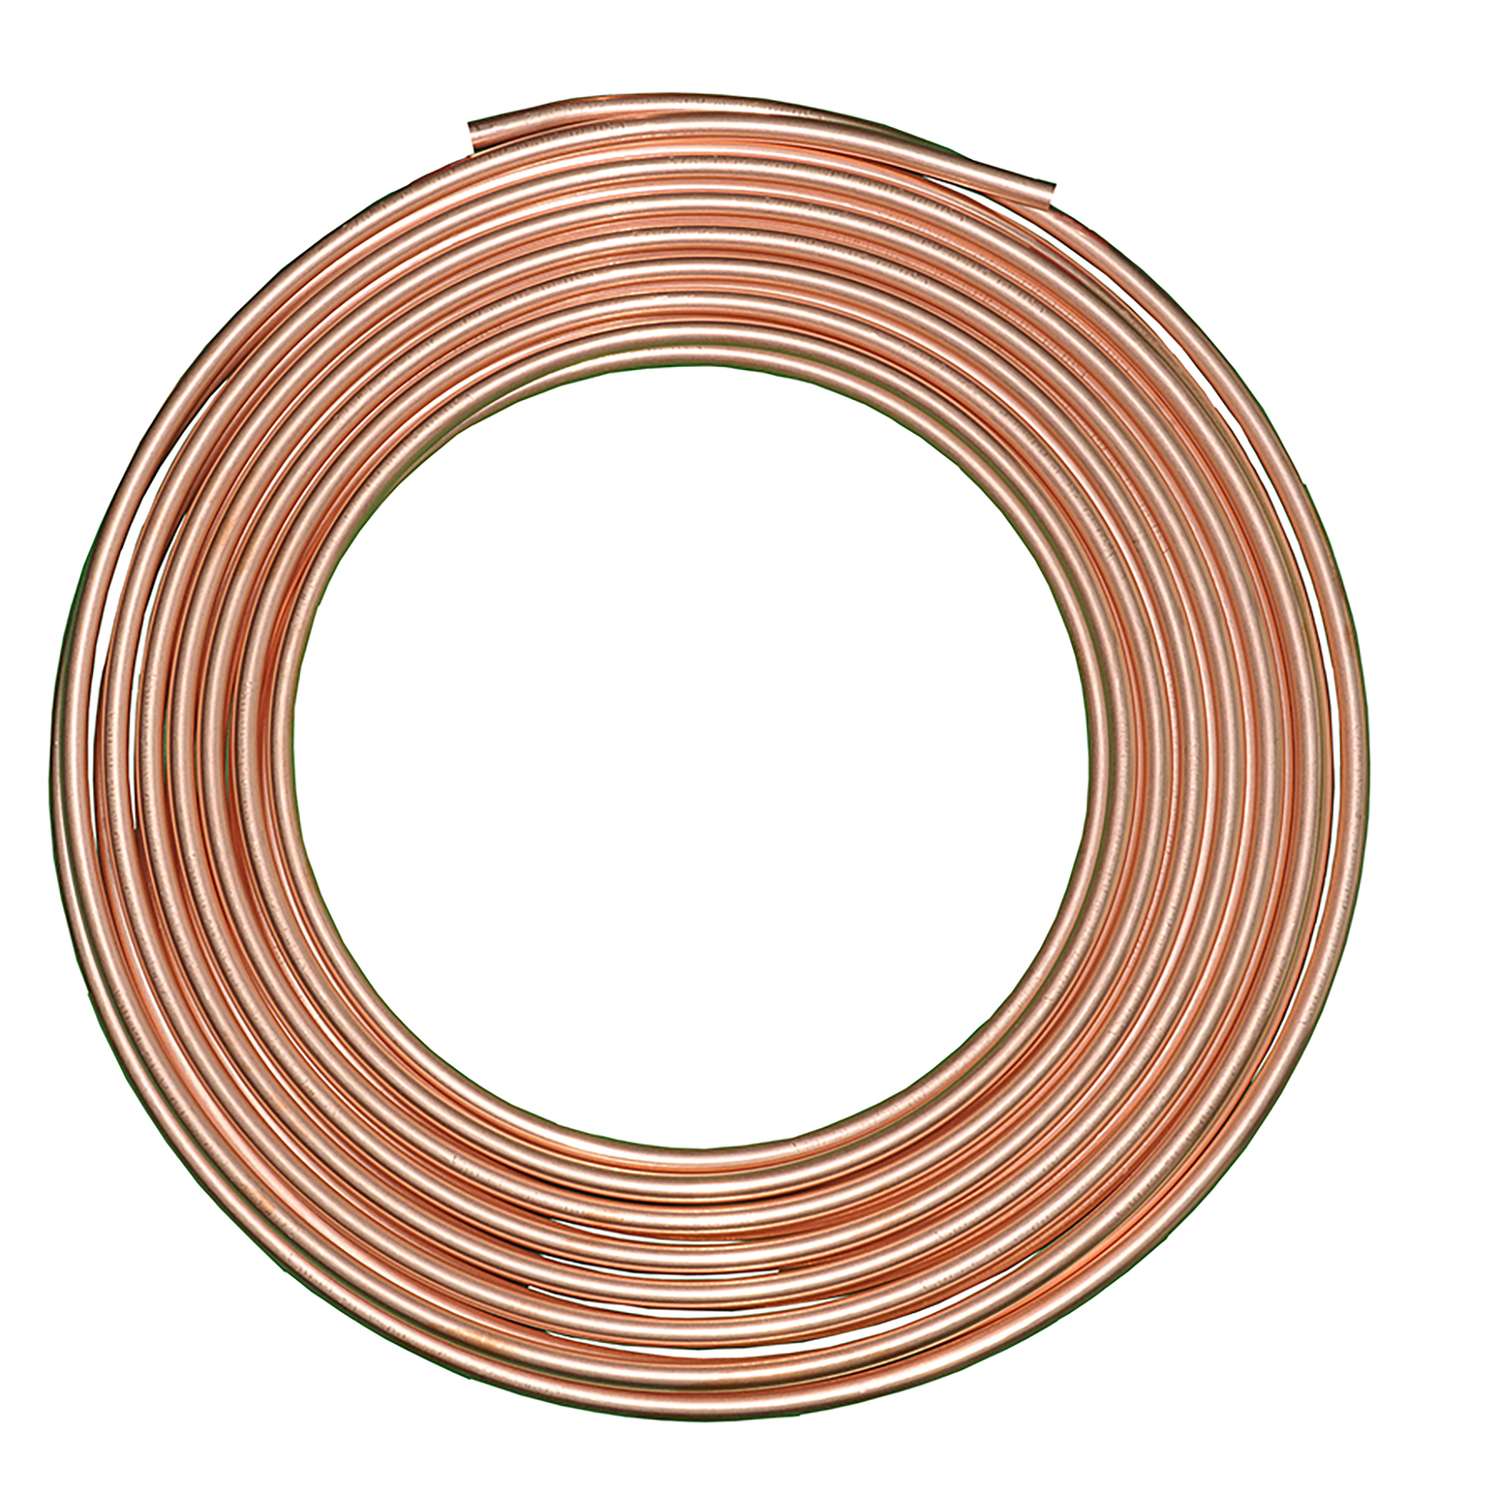 MED PSI 3/4 OD x .666 ID x .042 Wall x 5 Ft Length Copper Tube Type L 1 Unit 